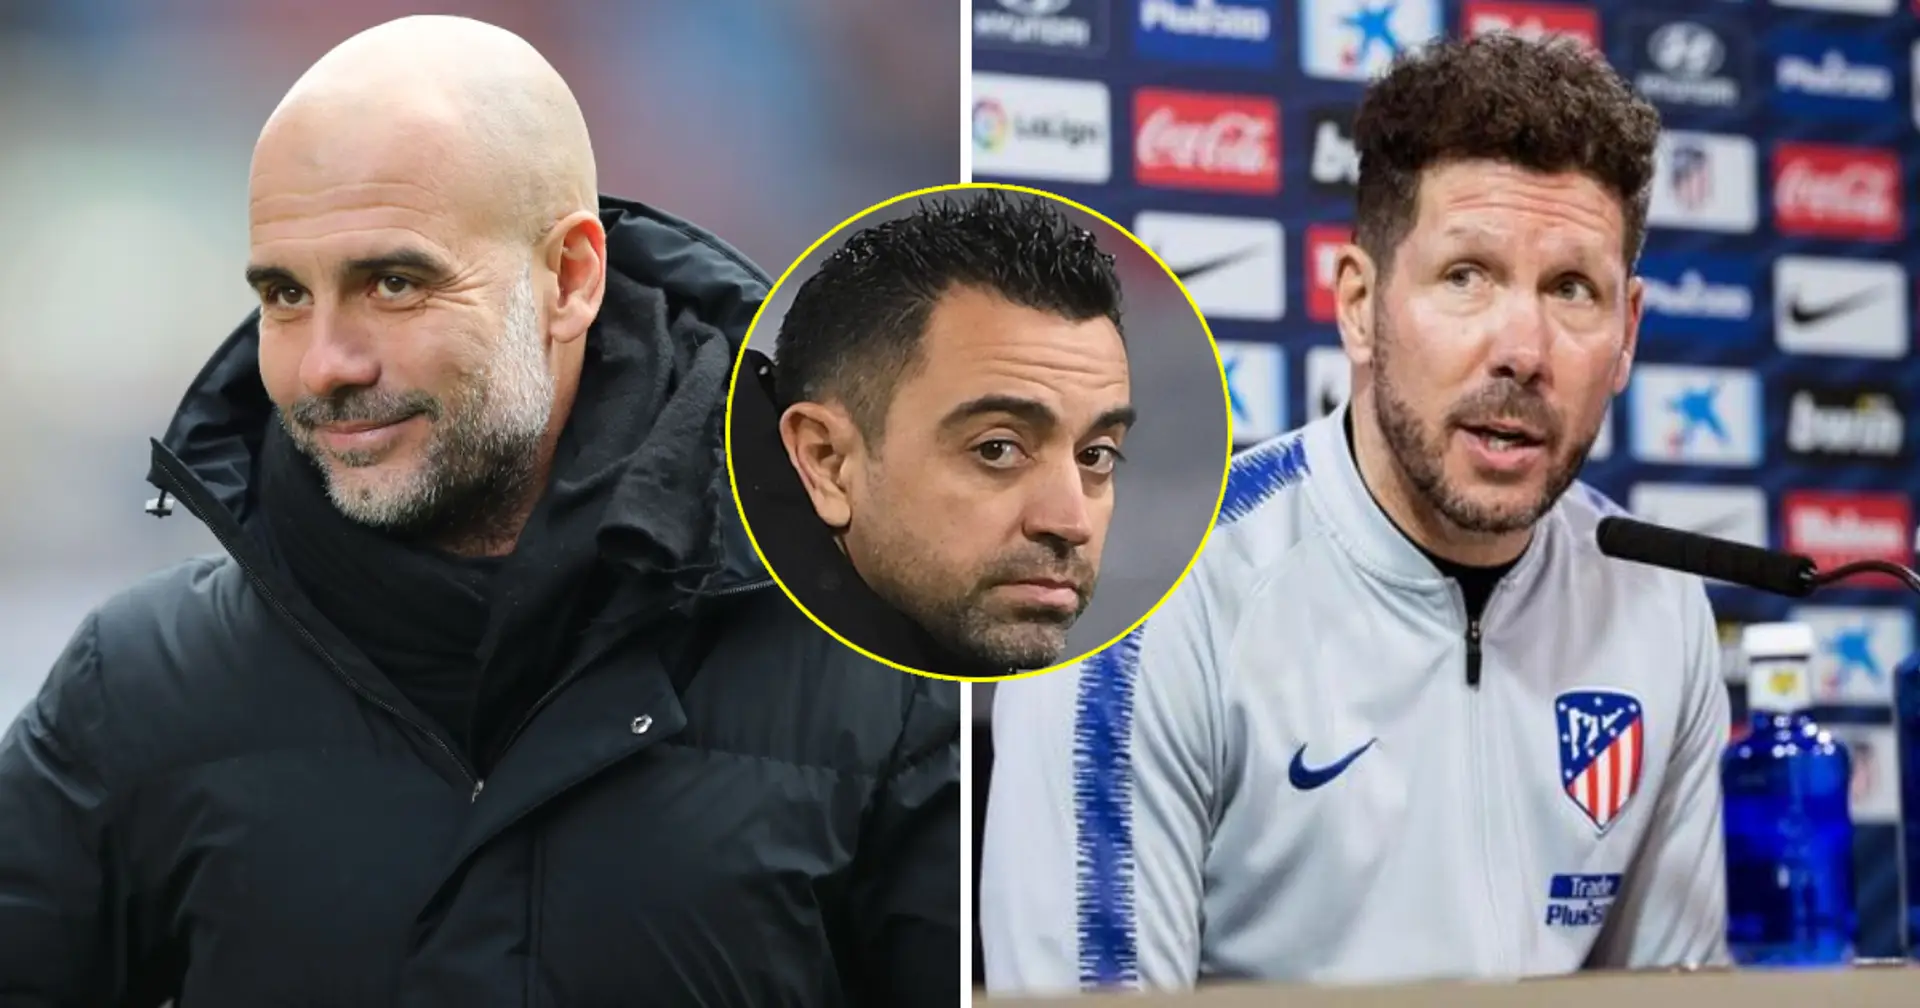 Diego Simeone labels Pep Guardiola 'lucky' because of Xavi and 4 others